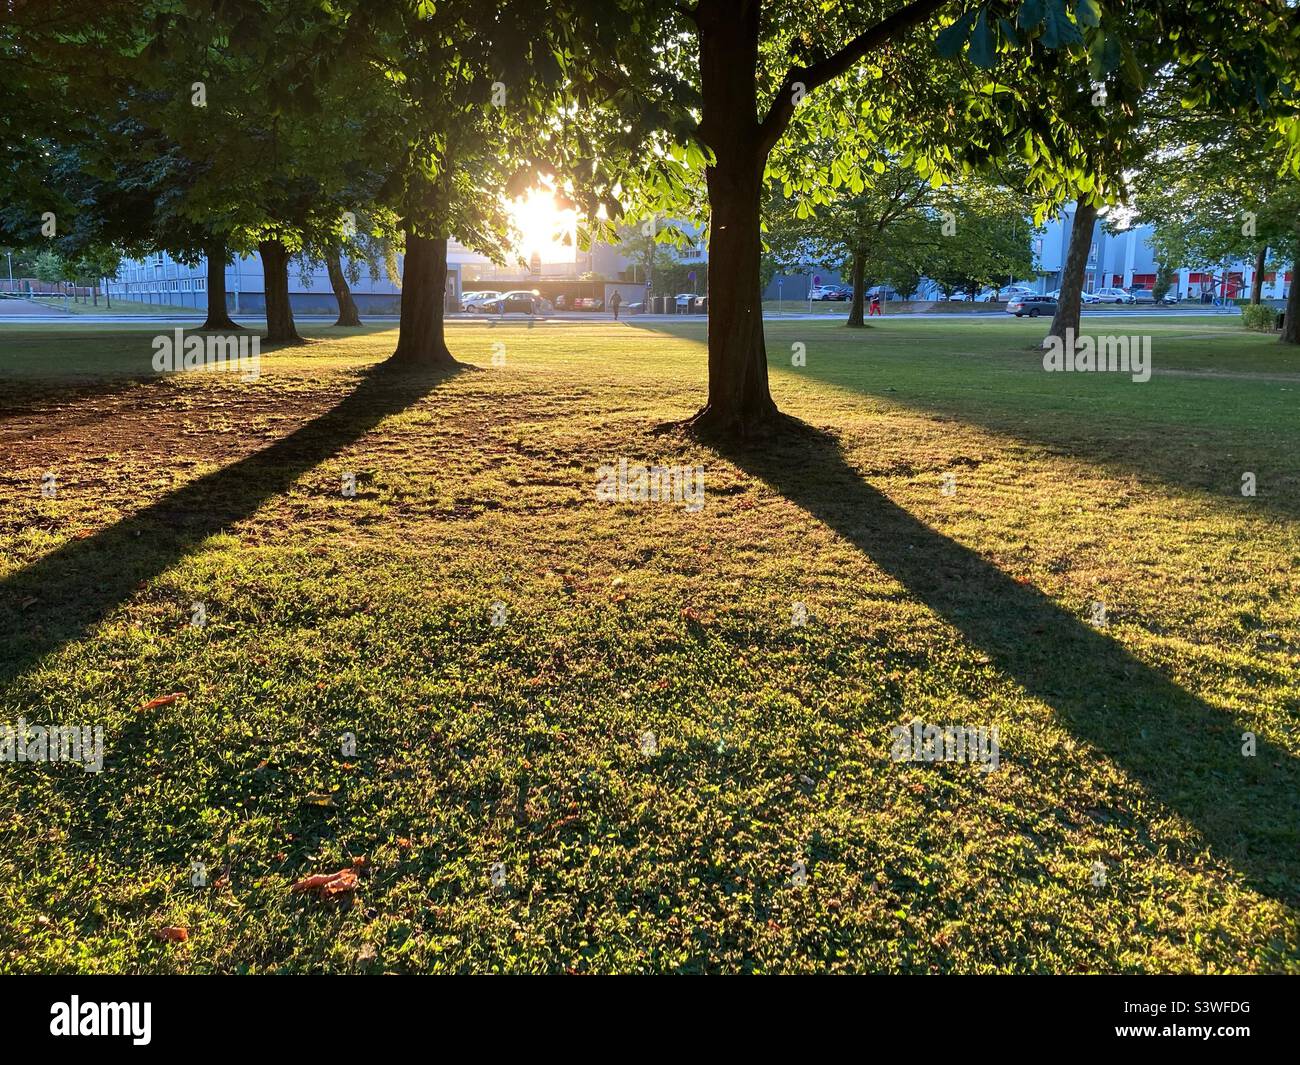 Trees with Long Shadows in the Evening sun on Nygårds Plads, Brondby, Copenhagen, Denmarko Stock Photo